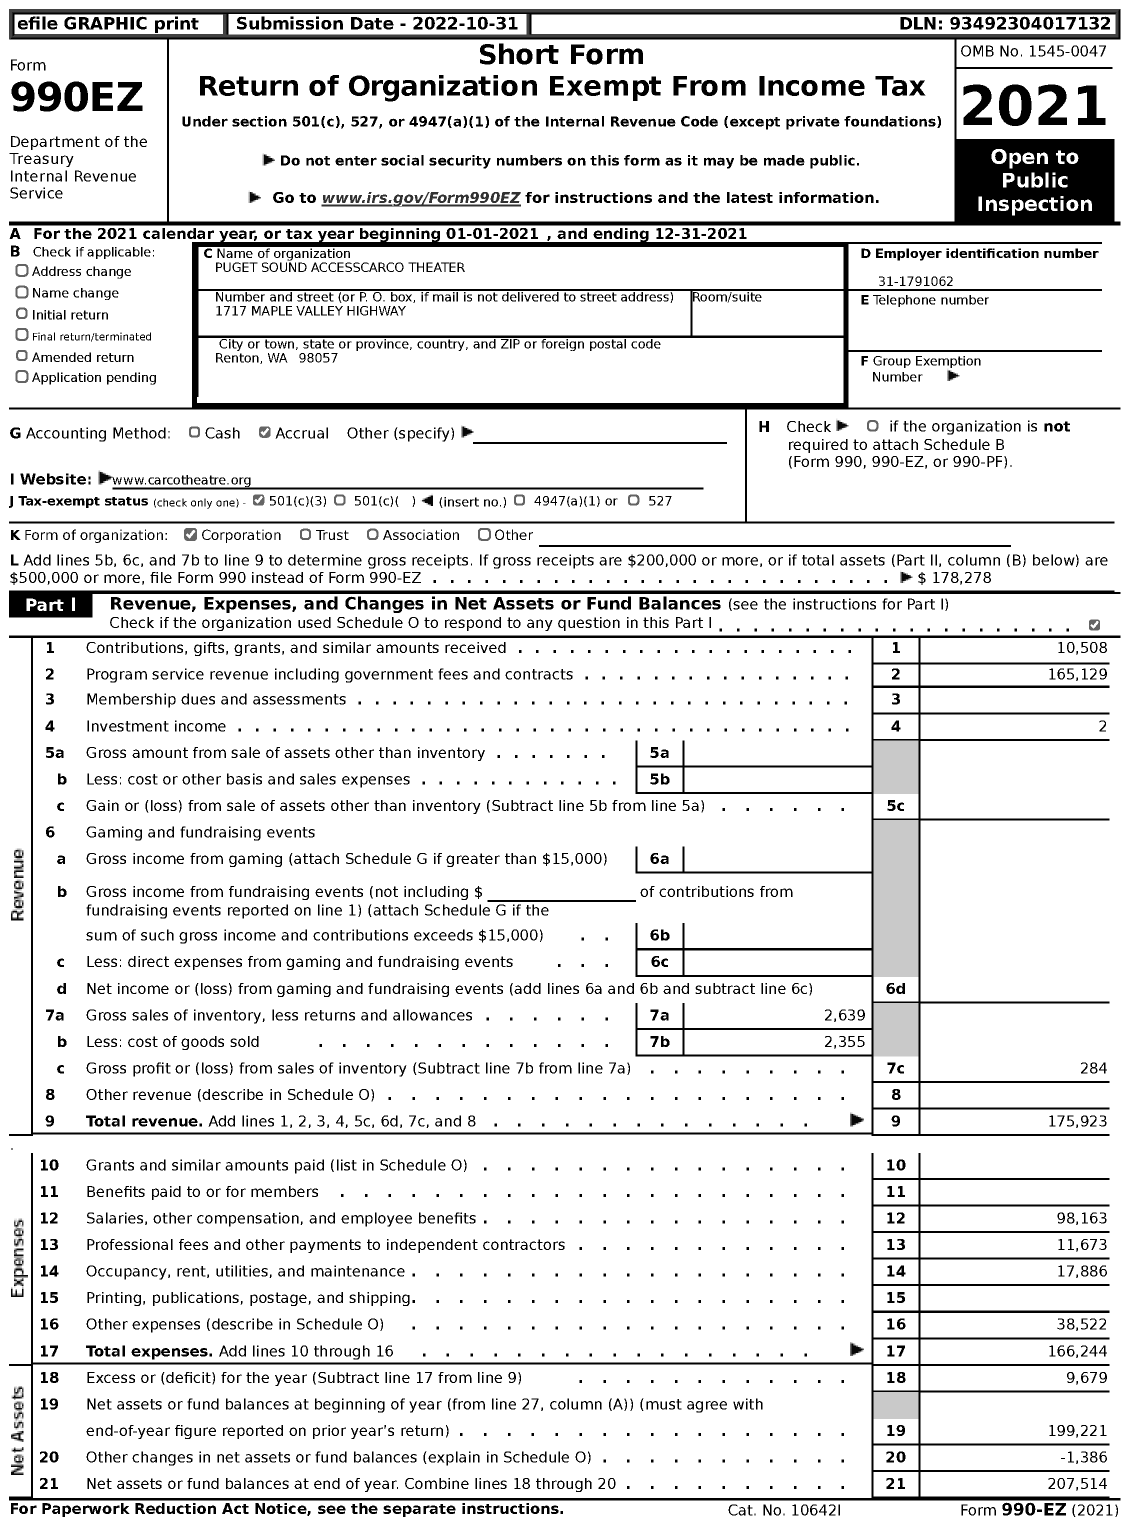 Image of first page of 2021 Form 990EZ for Puget Sound Accesscarco Theater